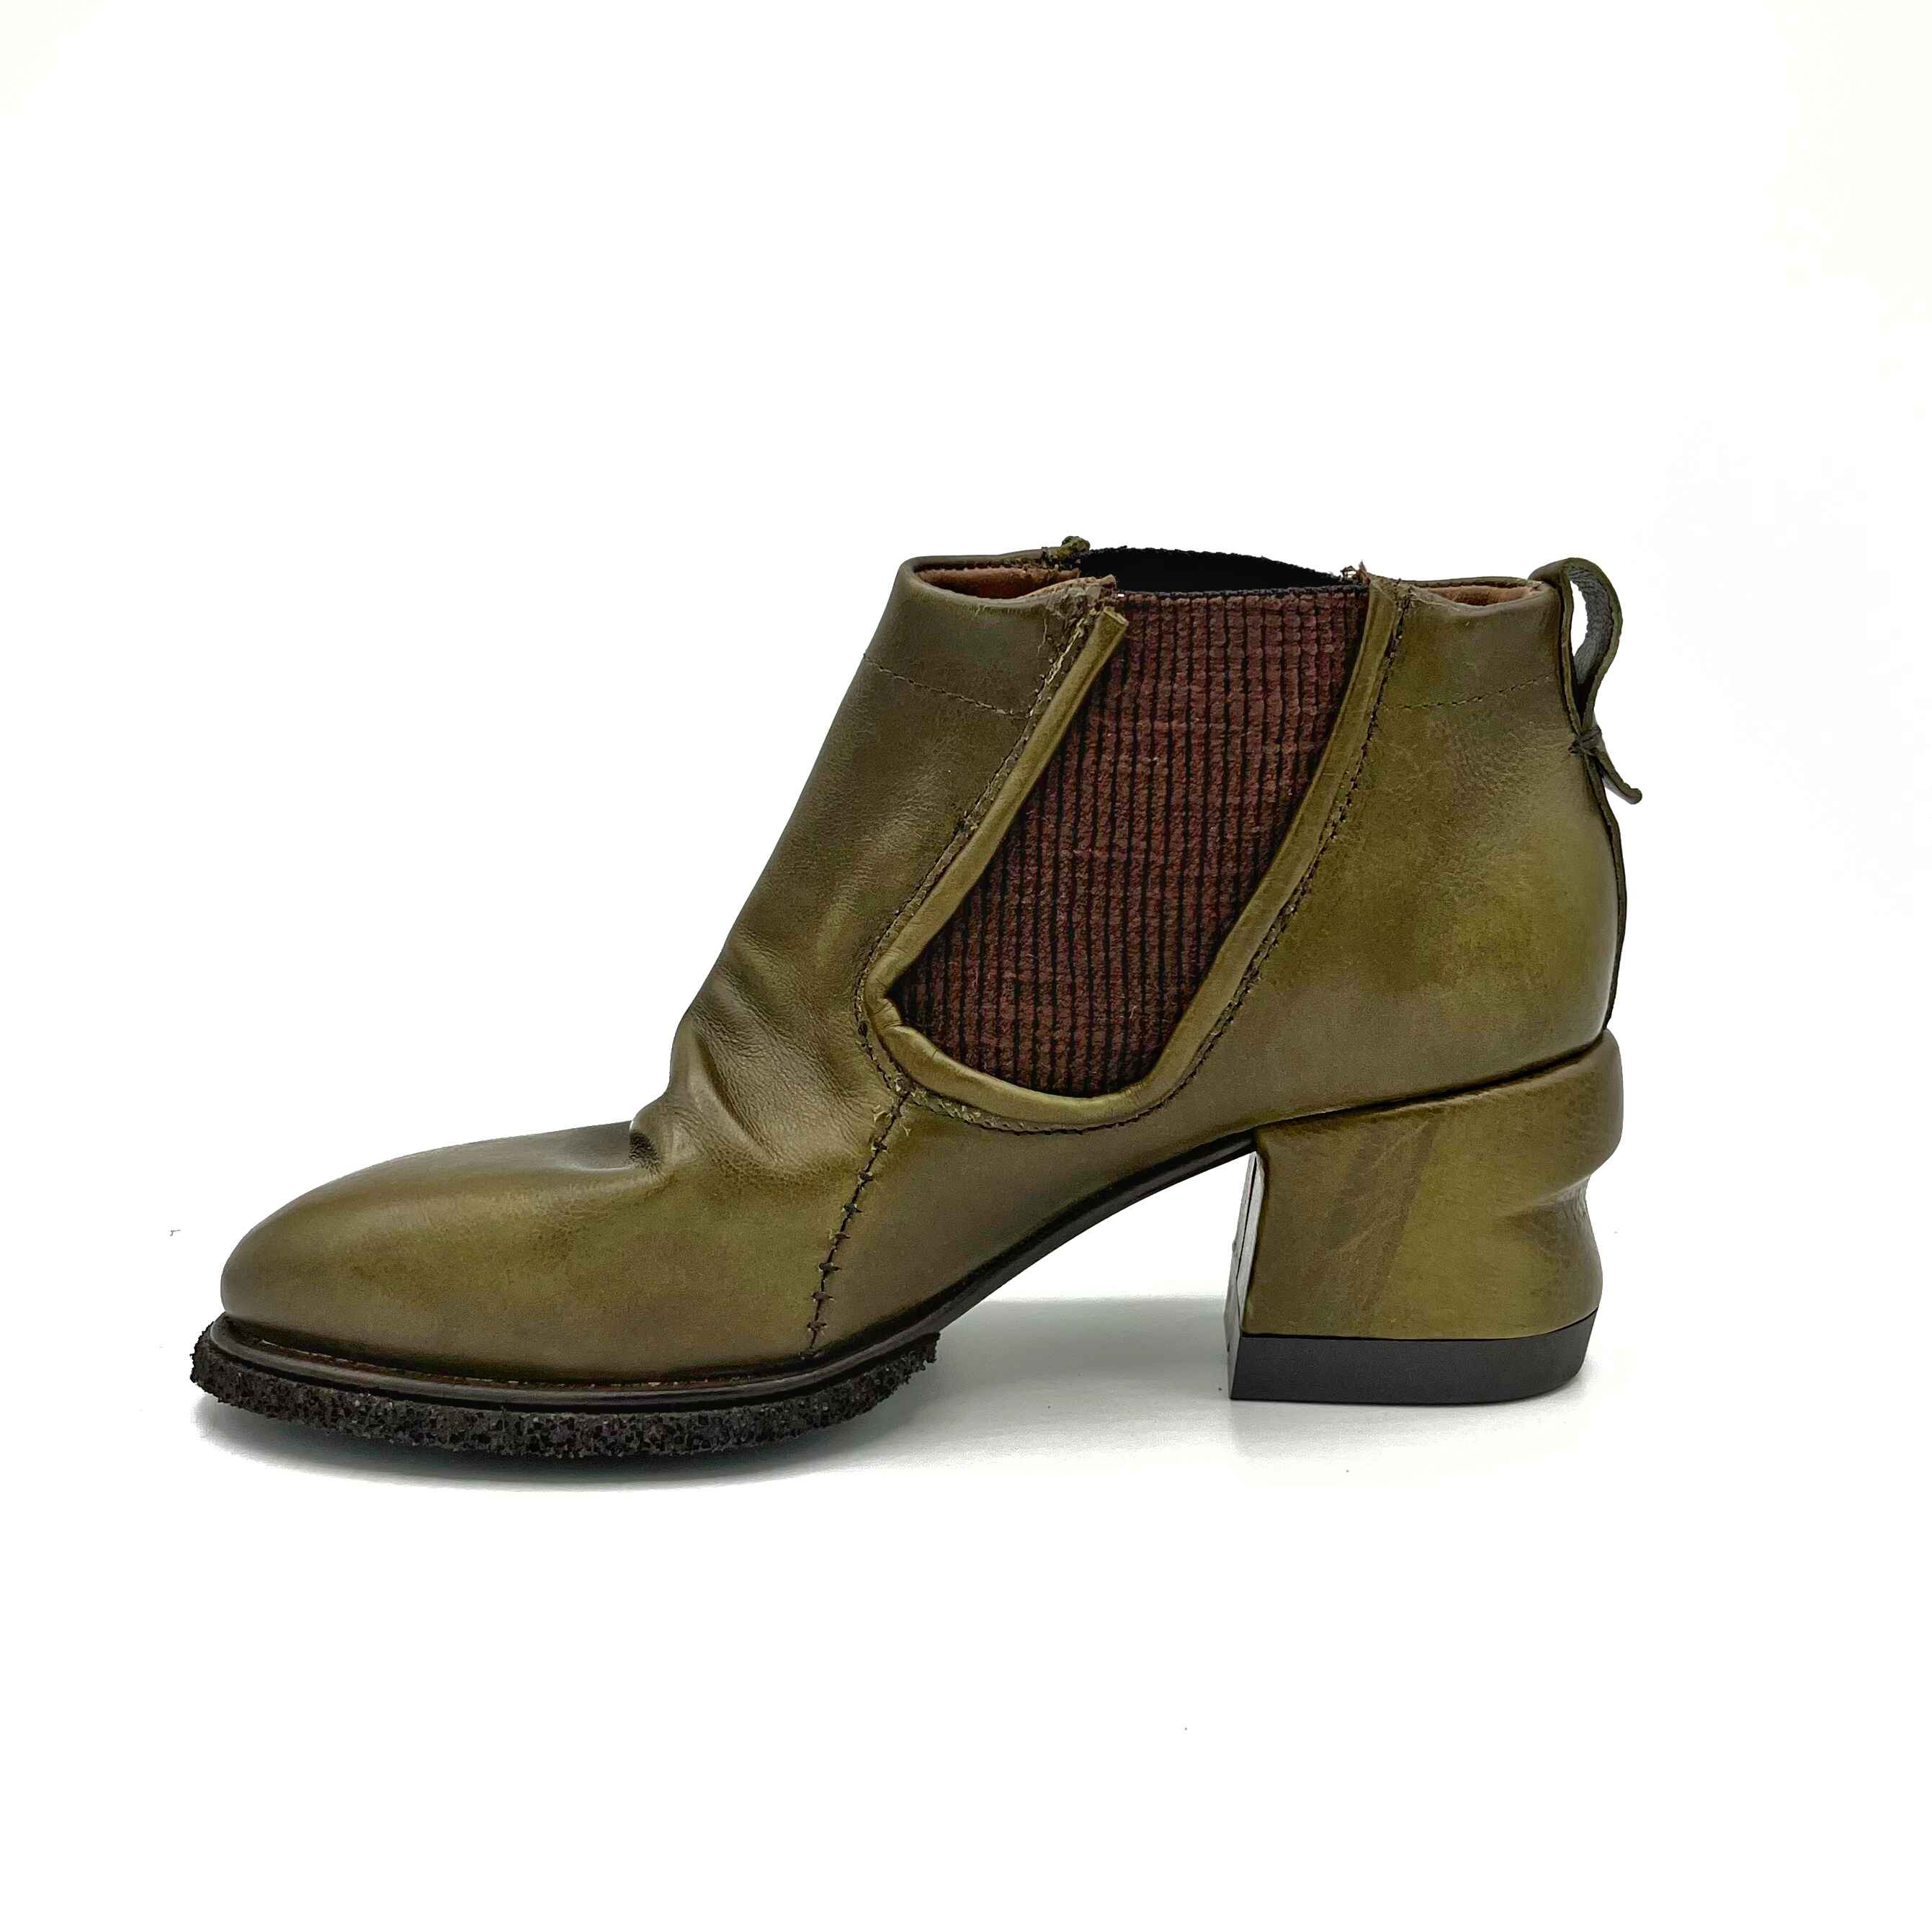 Inner side view of the A.S.98 Lavern Chelsea Boot in jungle. This boot is olive green with brown elastic gores on the side, a layered instep, and a grooved chunky heel.